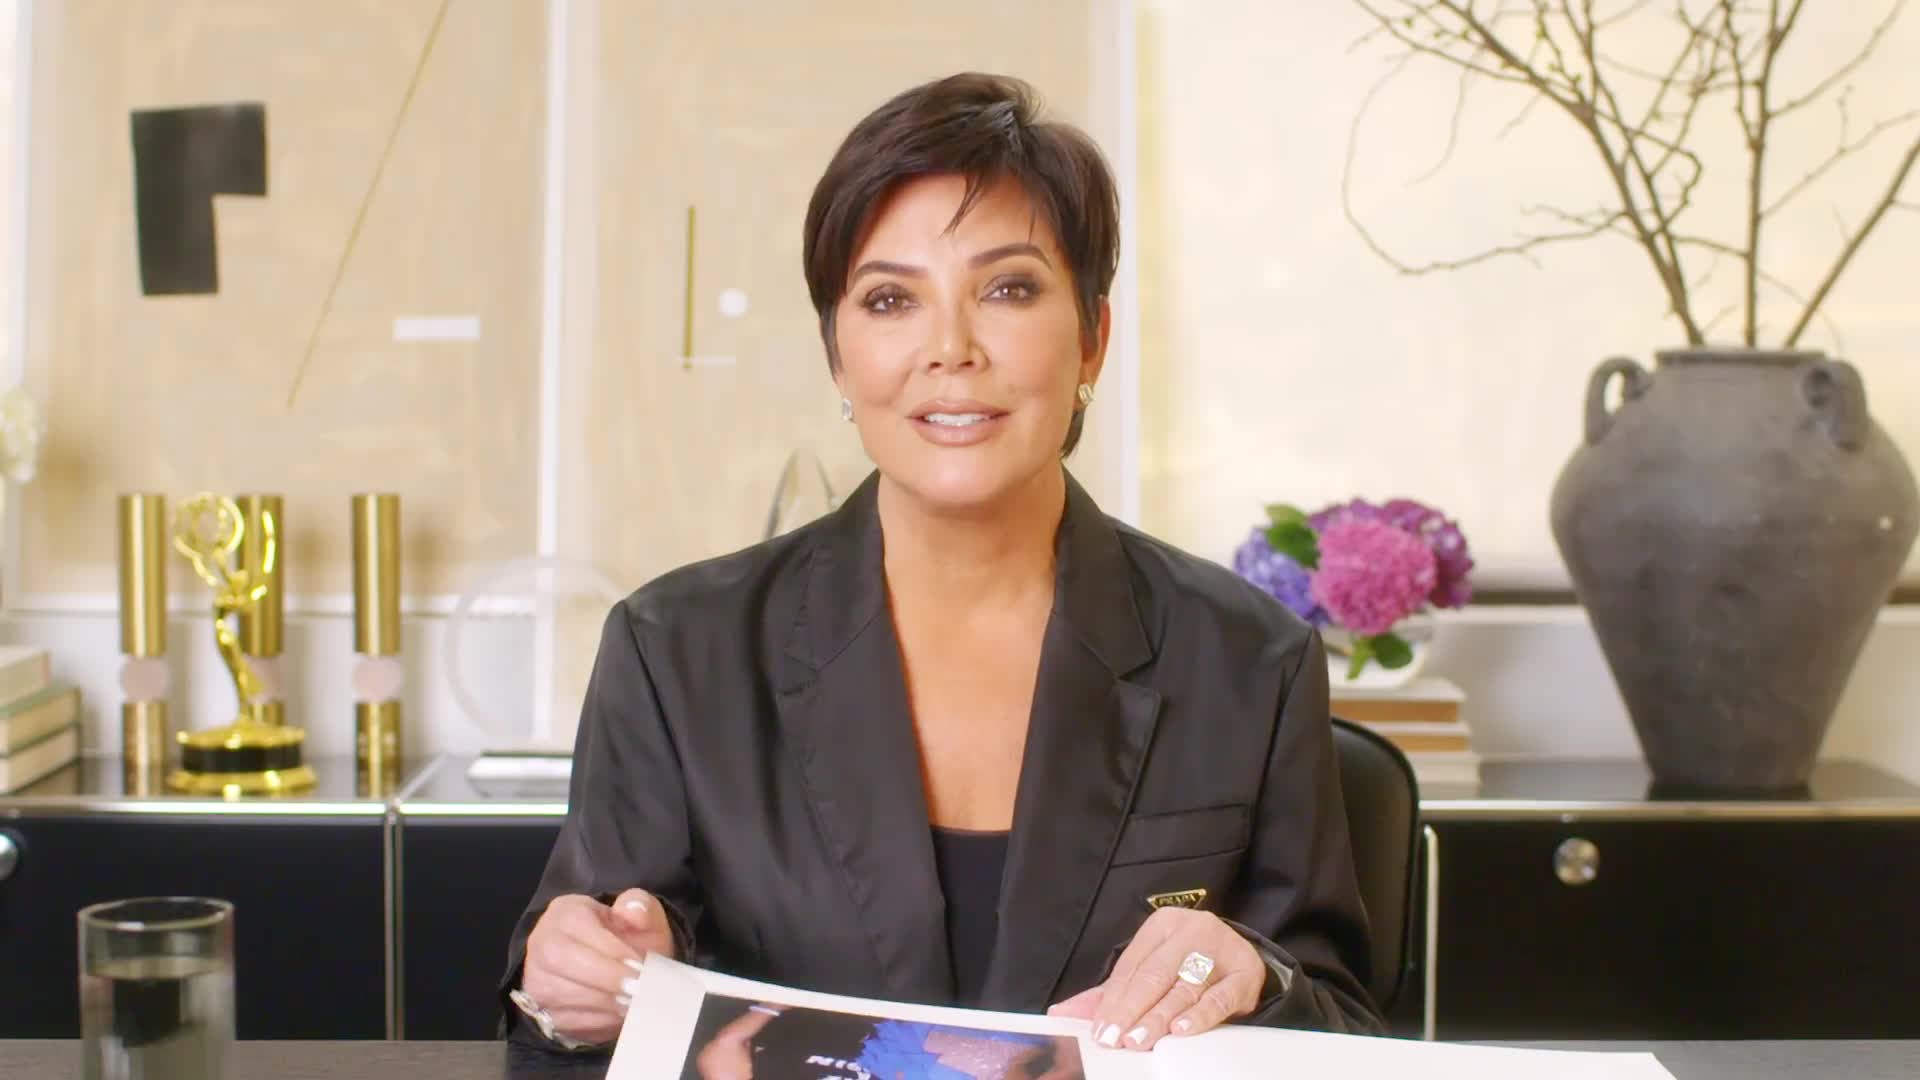 Watch Kris Jenner on Her Chanel Obsession and Which Daughter's Closet She  Raids the Most, Life in Looks